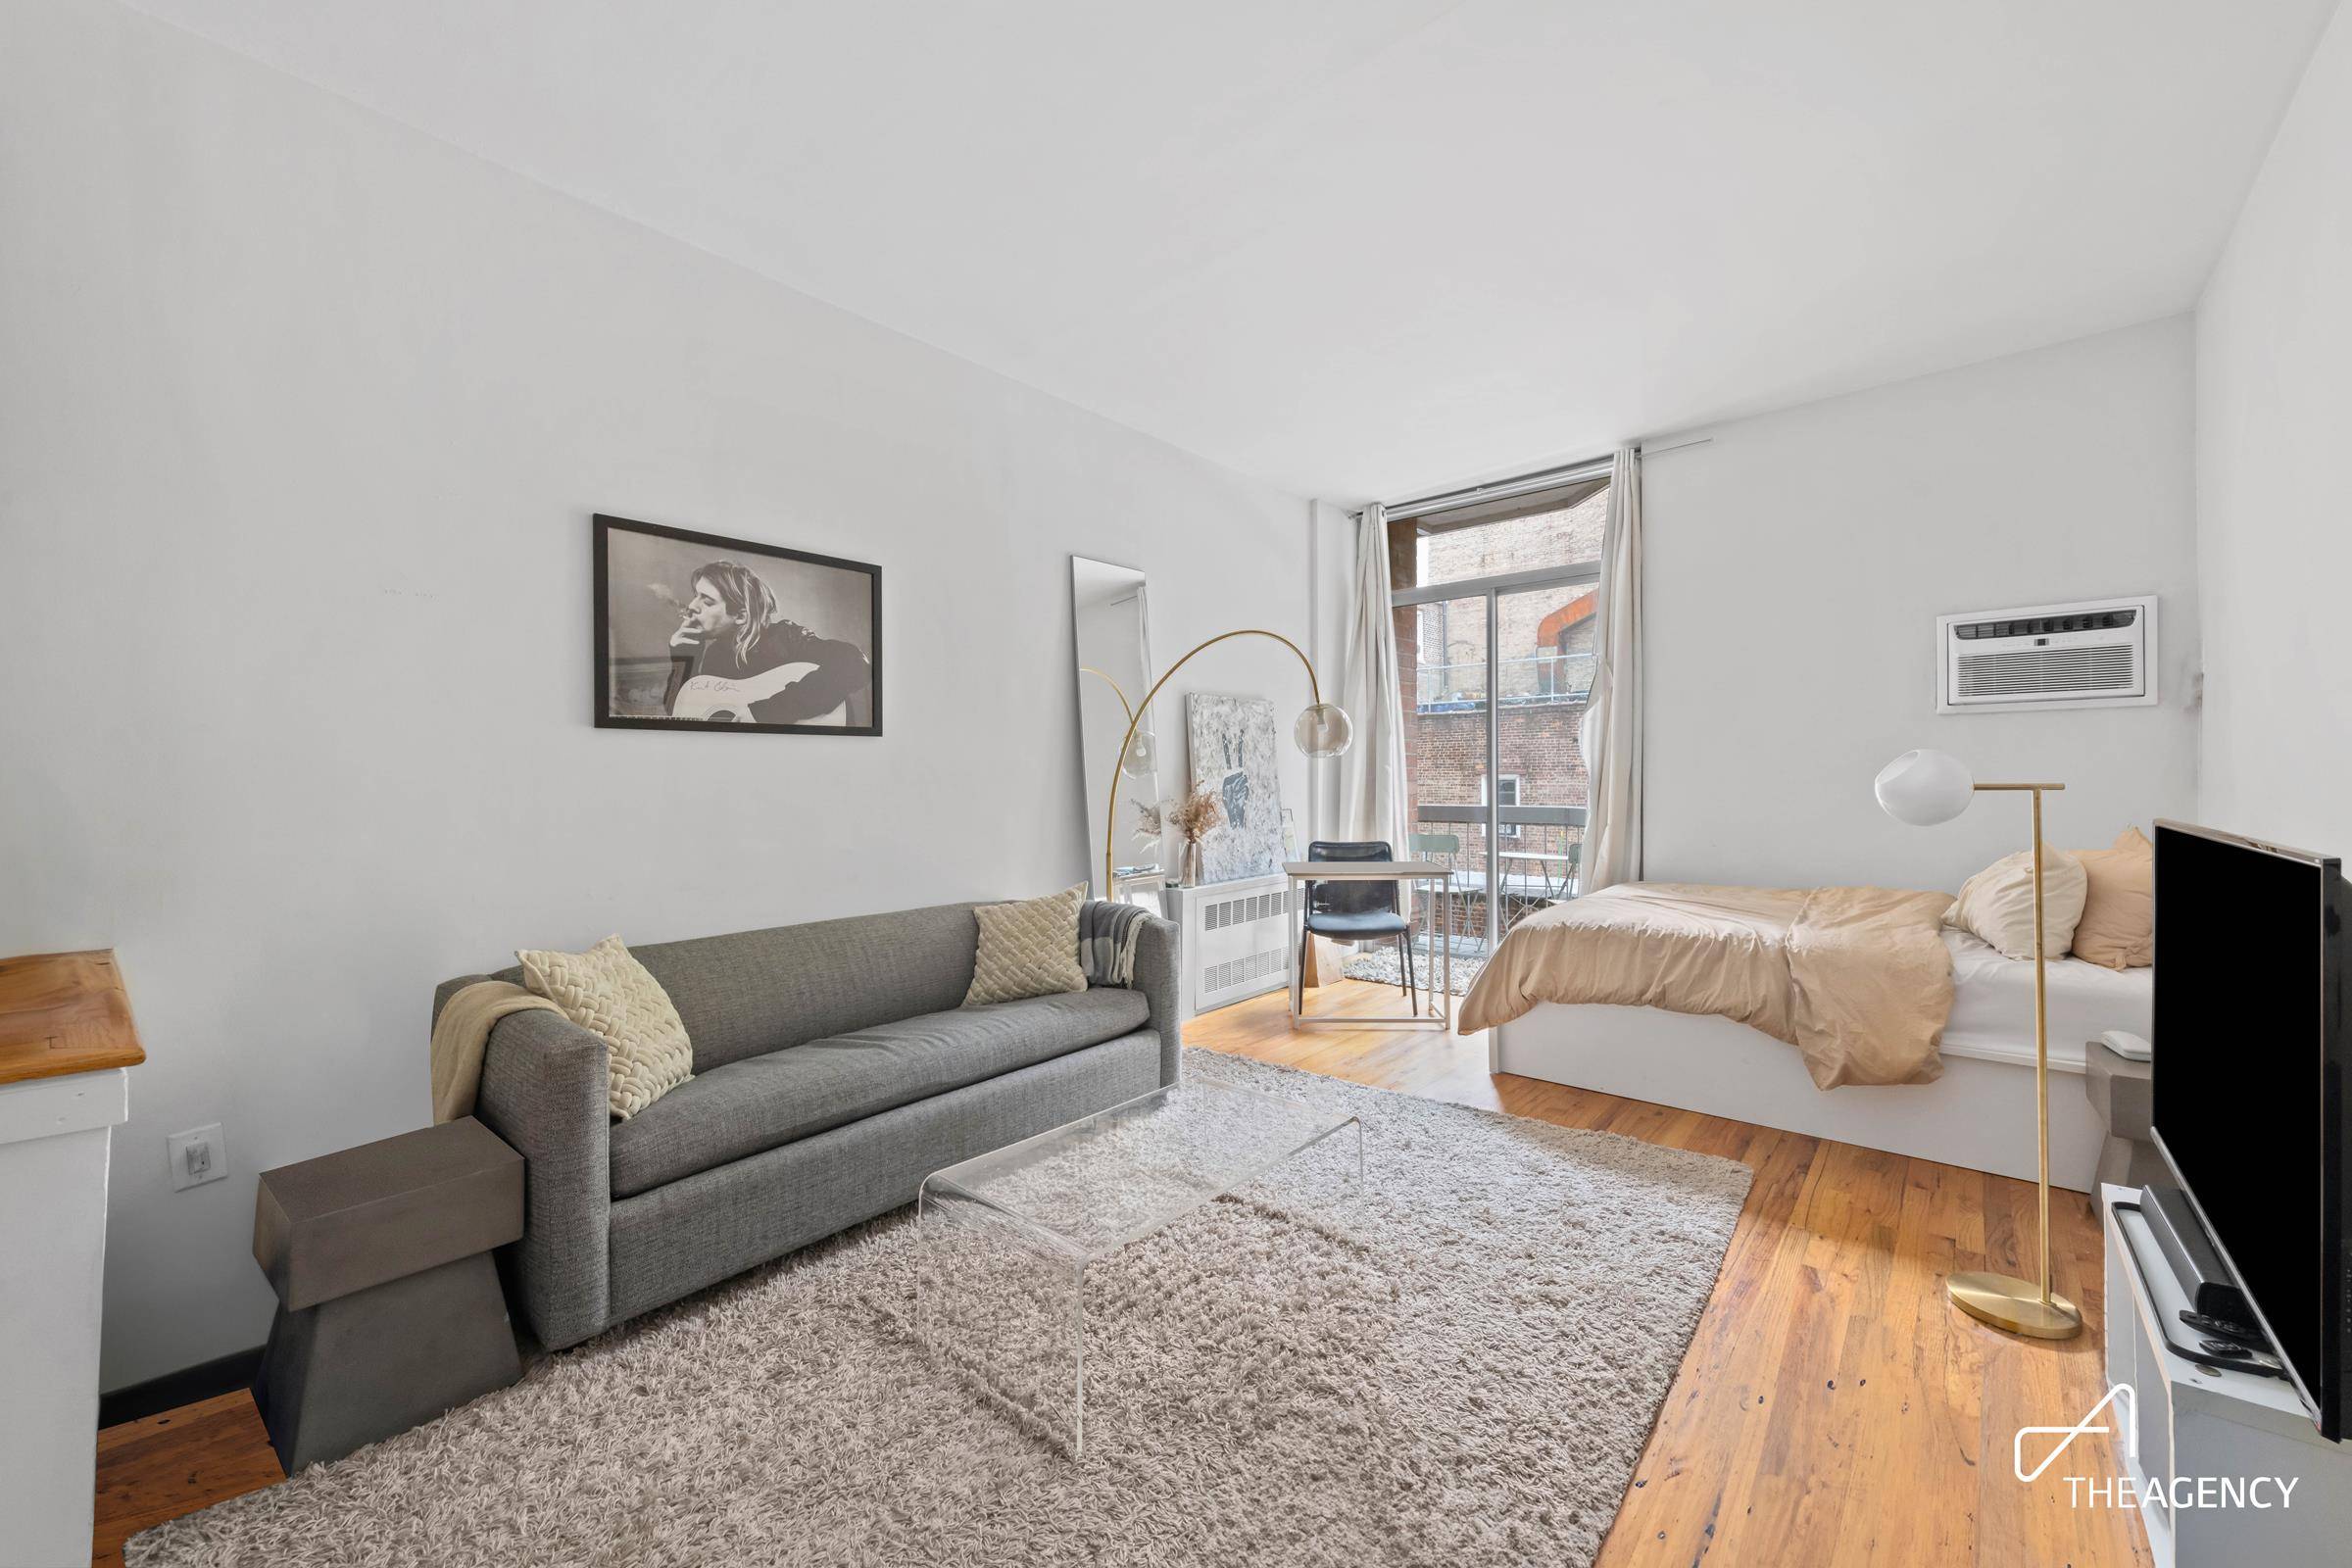 Residence 2B at 184 Thompson Street is a bi level studio with great layout and amazing 10ft ceiling heights.